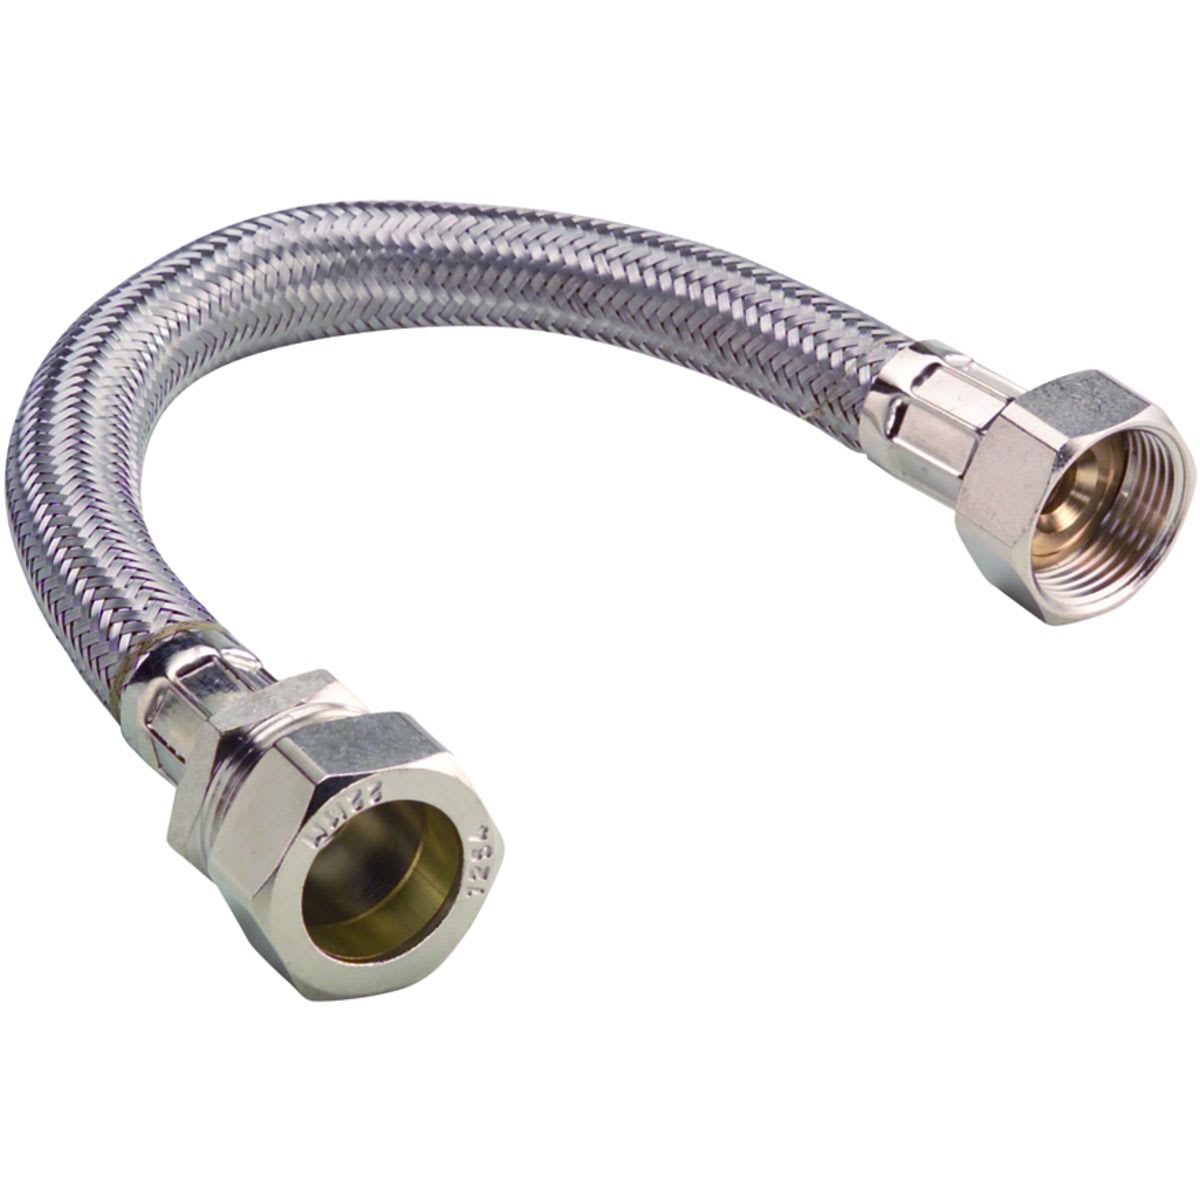 FLEXIBLE TAP CONNECTER 15 X 1/2 X 500mm WITH SWIVEL ELBOW